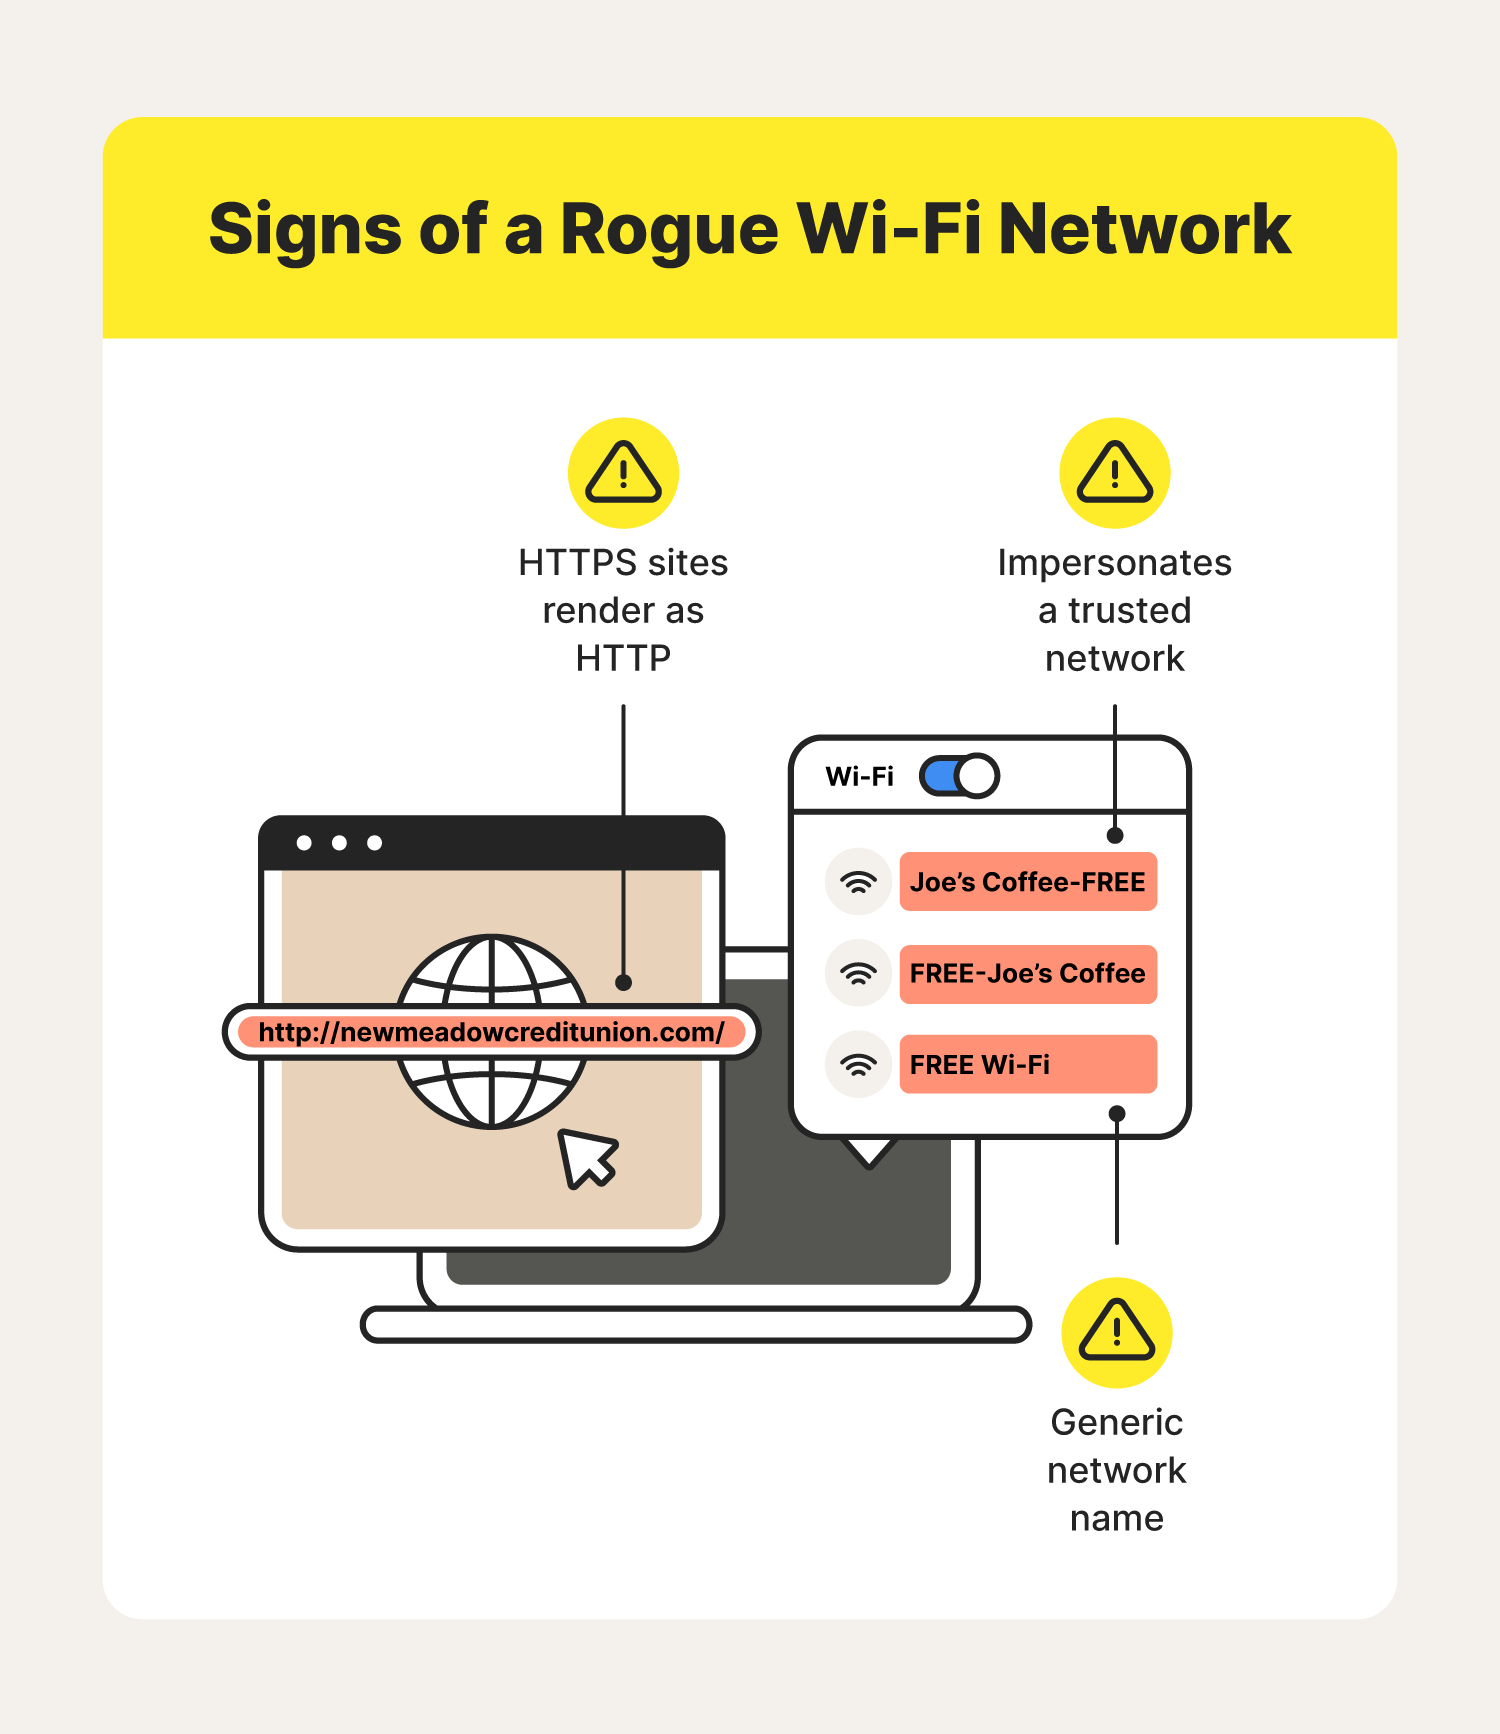 A graphic highlights the warning signs of an unsafe public Wi-Fi hotspot.